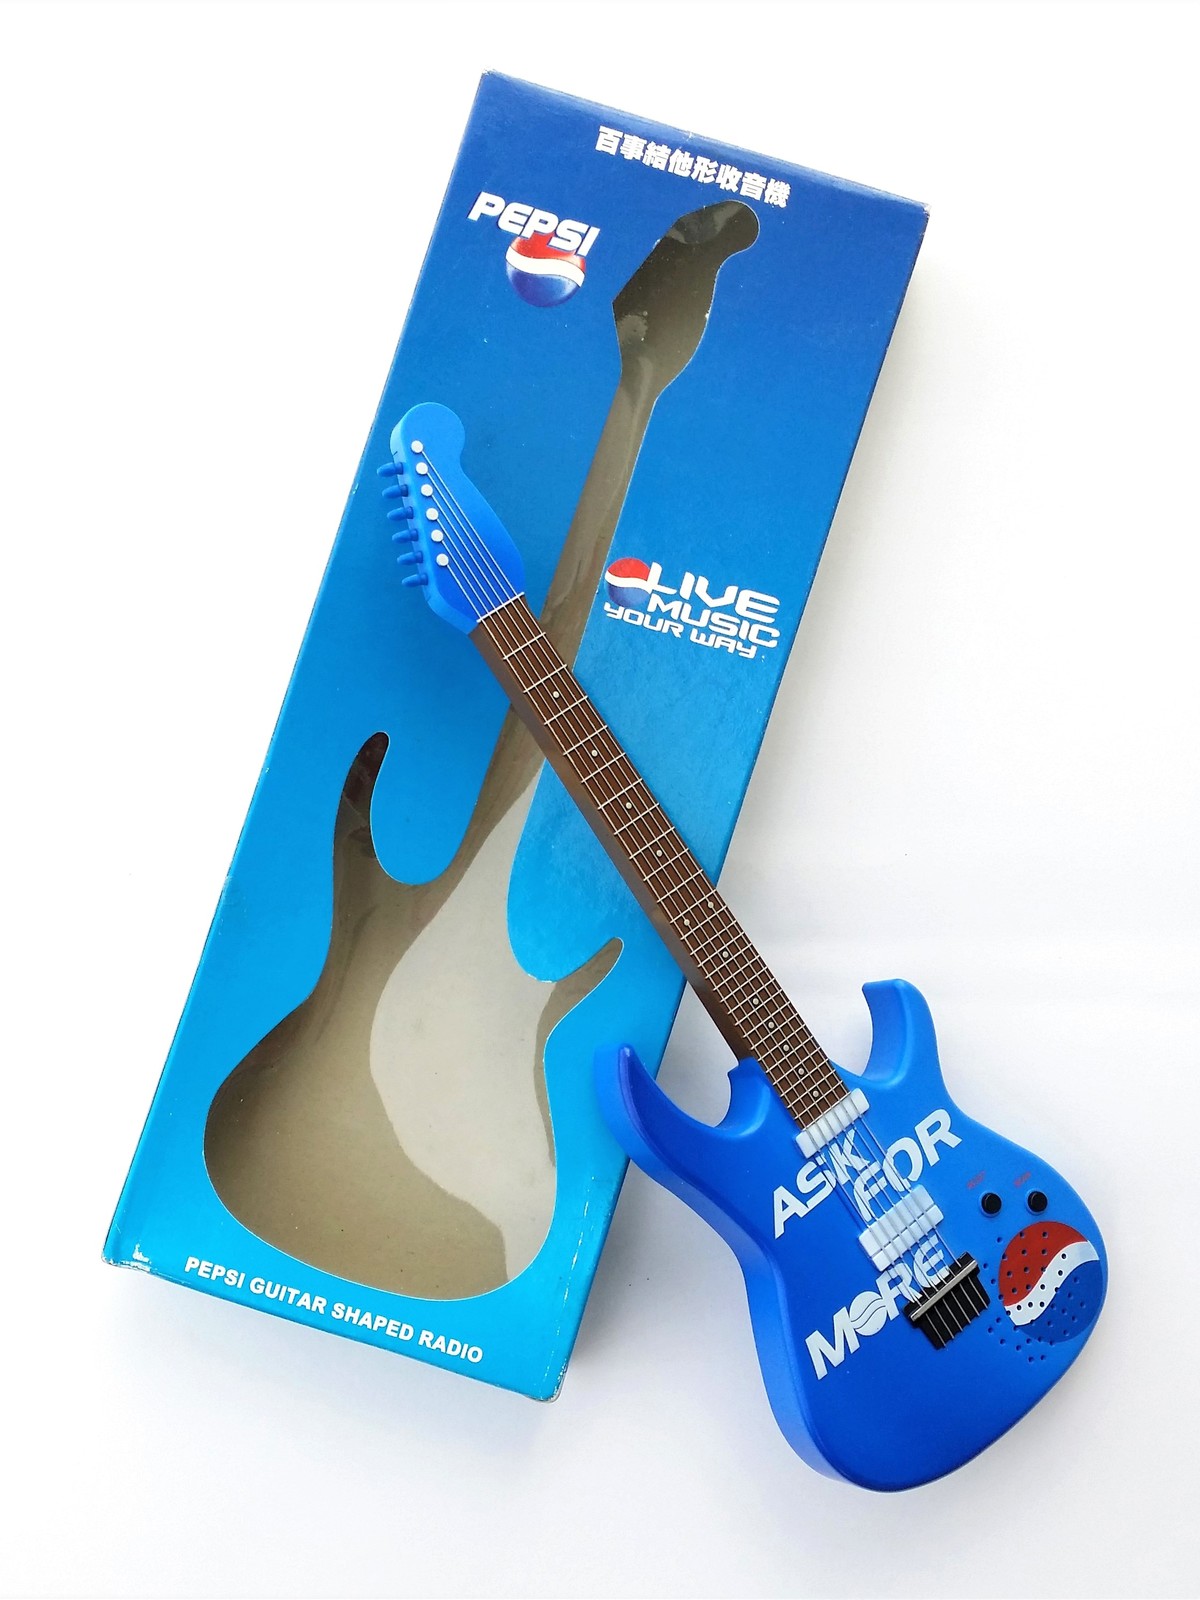 2000s Pepsi ASK FOR MORE Guitar Shaped Auto Scan Radio 33.5cm Limited Edition - $59.90